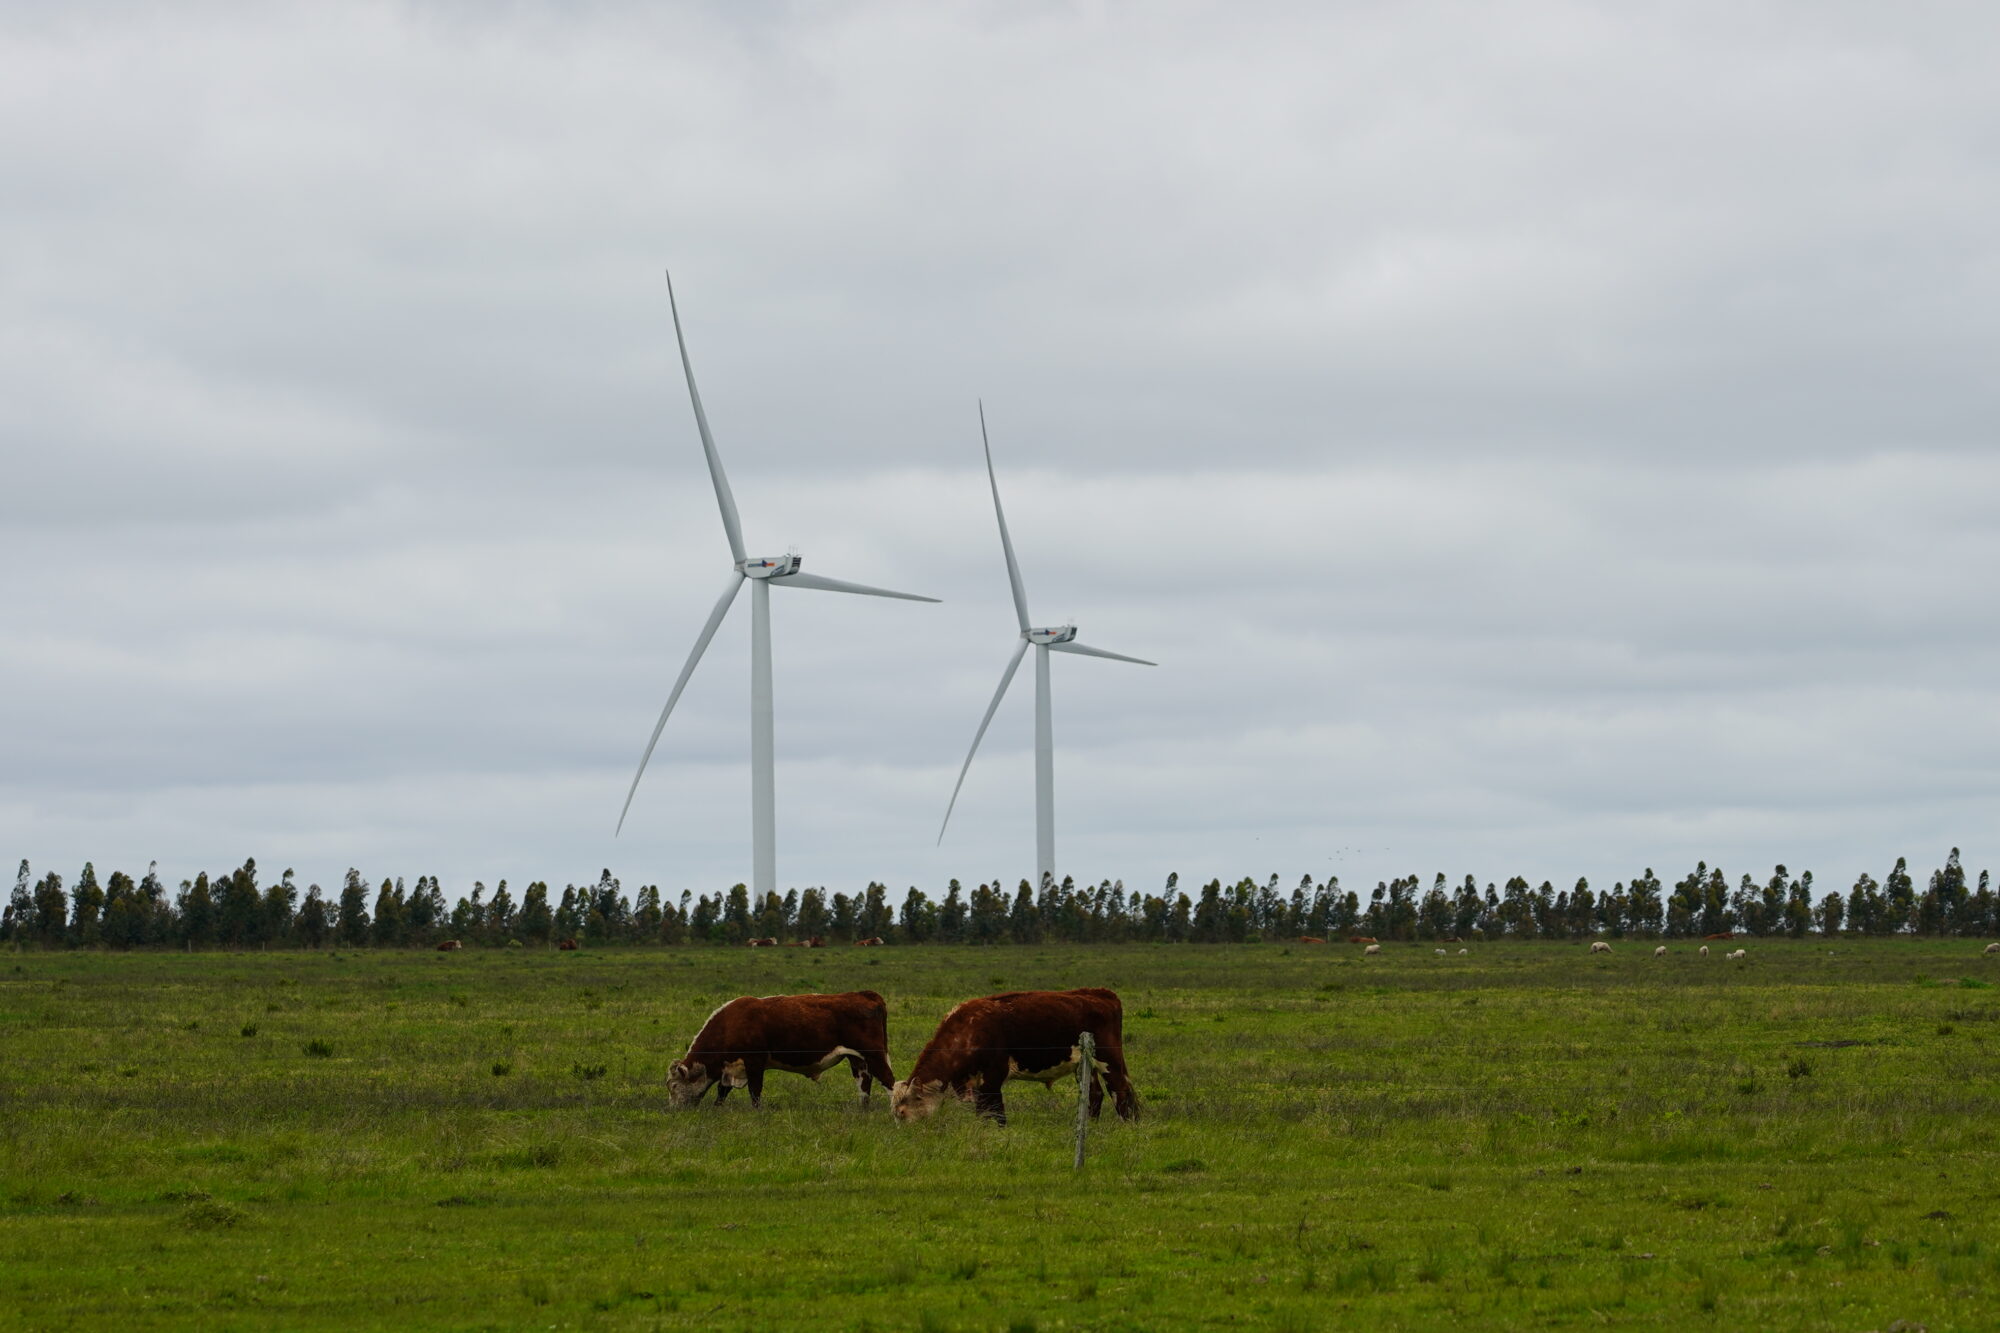 <p>Renewables supply 98% of Uruguay&#8217;s energy, setting the nation on the path to carbon neutrality, but challenges remain in emissions monitoring and reduction in key industries such as beef (Image: Diego Casal)</p>